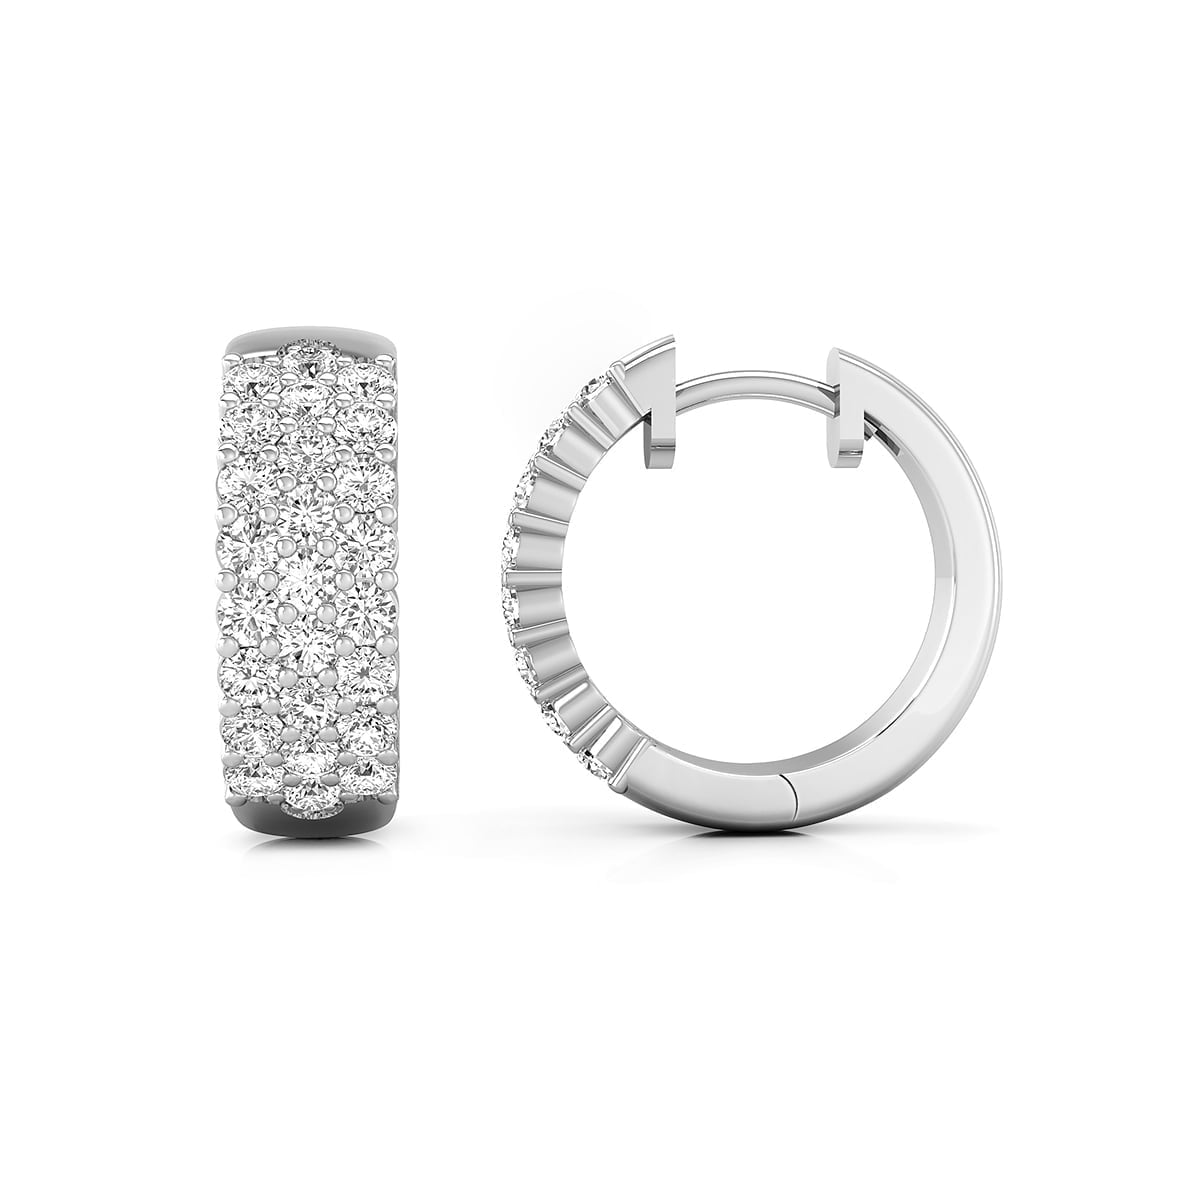 Pave Set Classic Round Cut Moissanite Women's Any Occasion Minimalist Huggies Earrings (1 1/20 TCW)